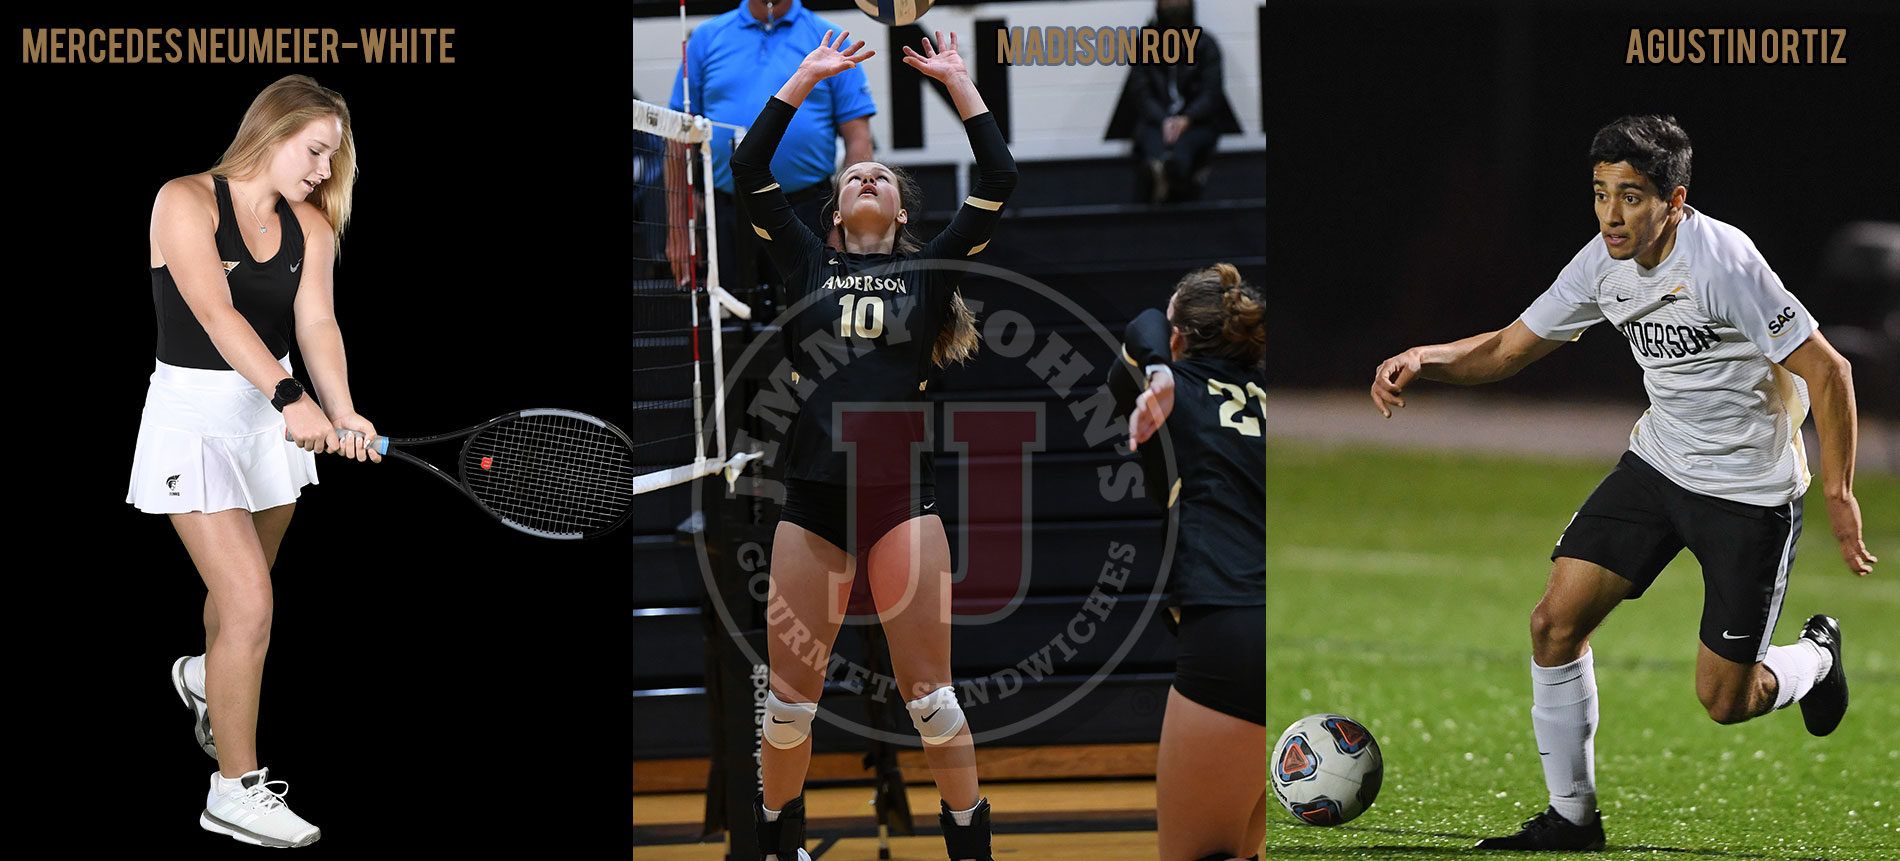 Ortiz, Roy and Neumeier-White Named Jimmy John’s Male and Female Athletes of the Week